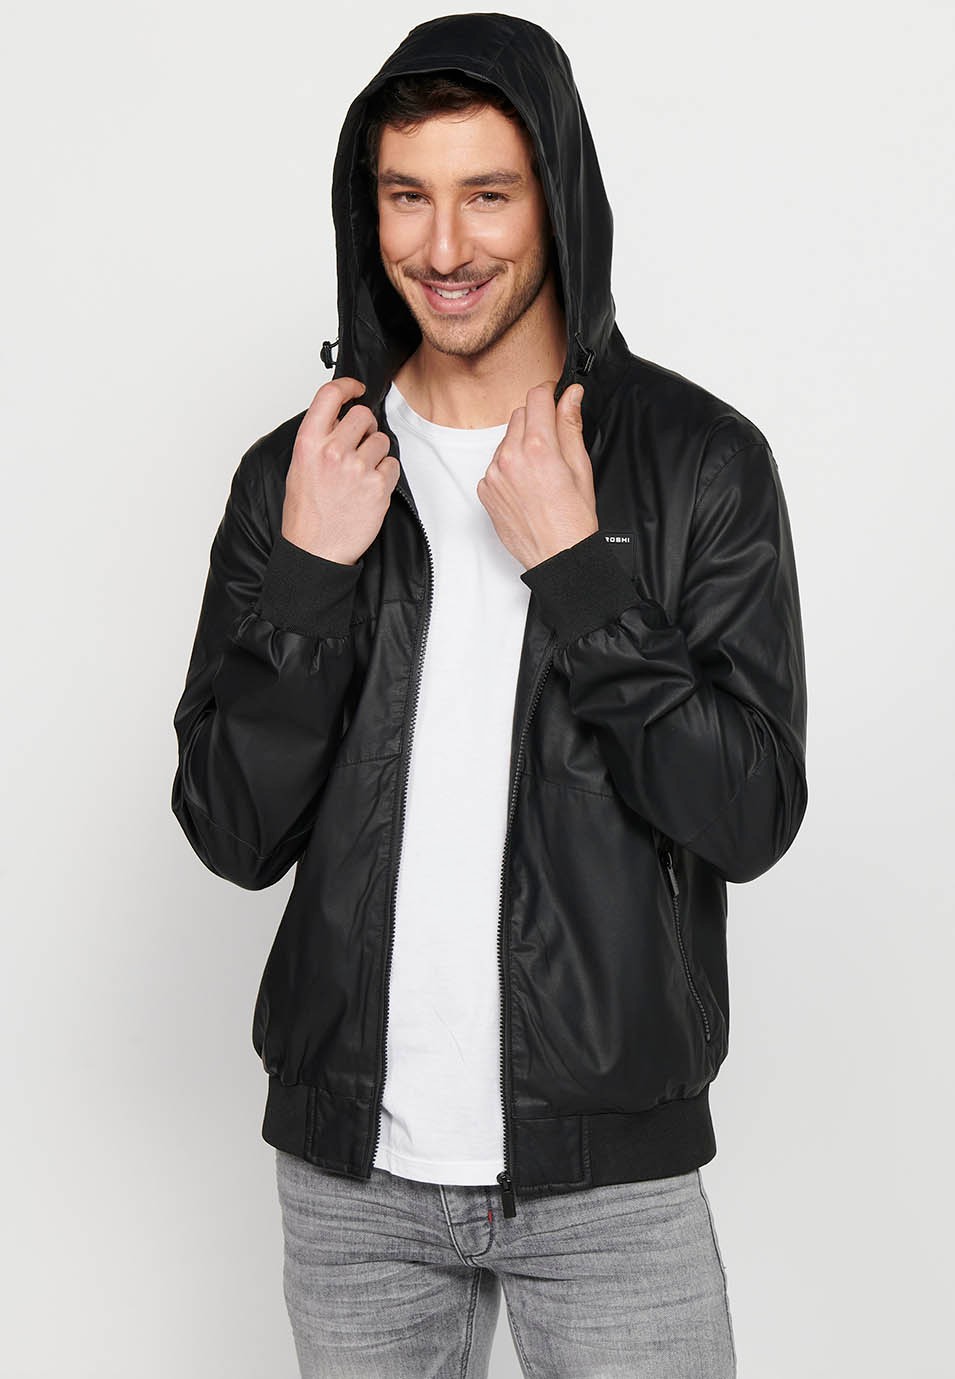 Leather-effect jacket with front zipper closure and hooded collar in black for Men 11